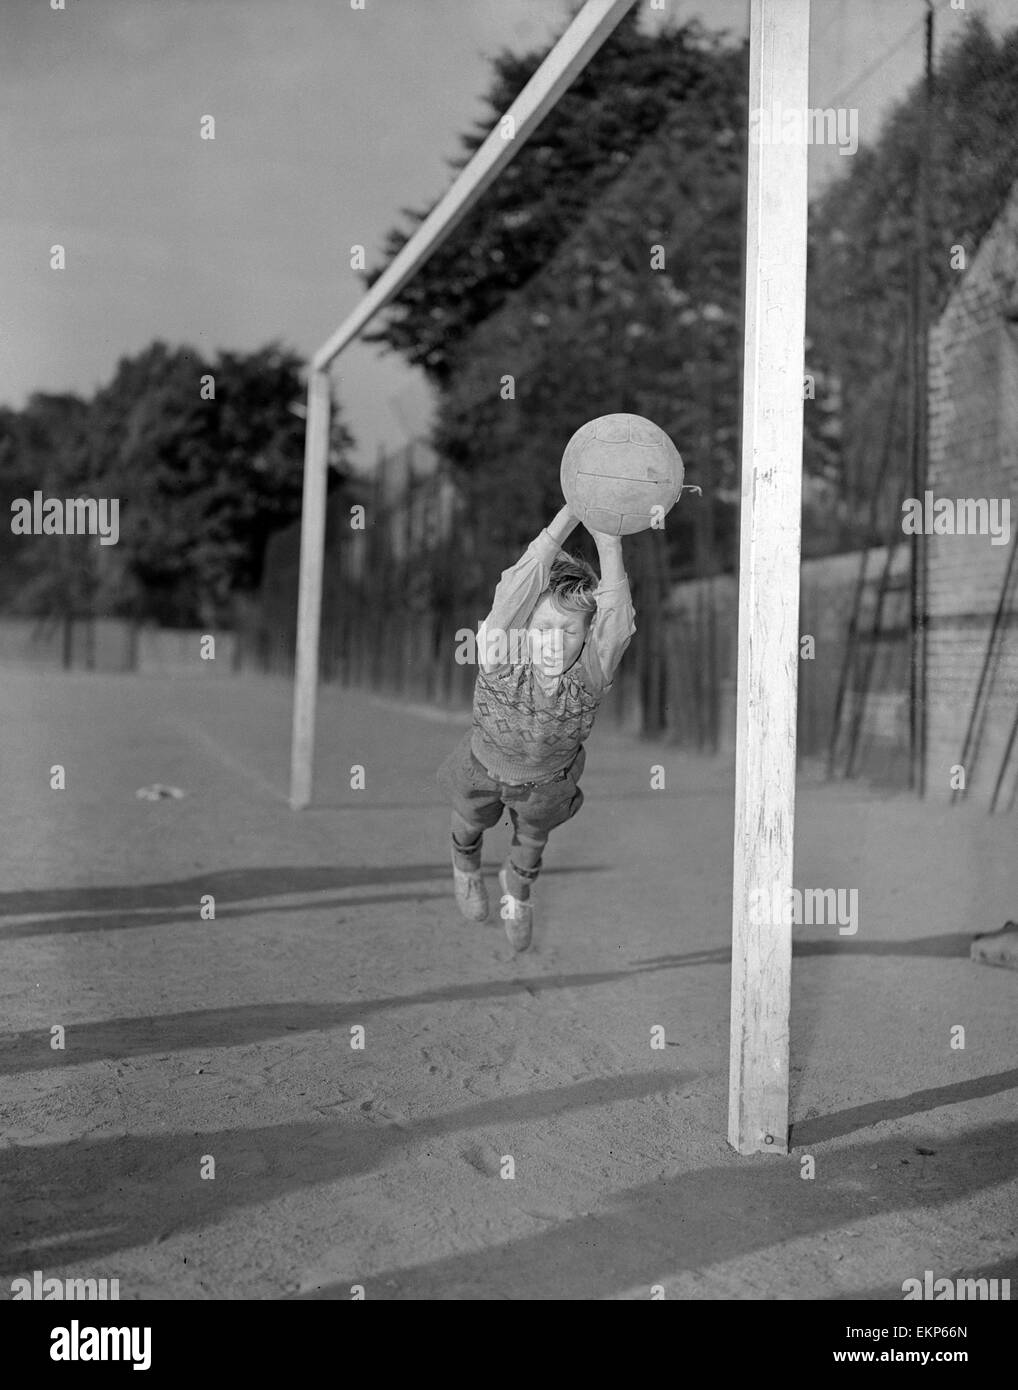 Ten year old George Welch makes a flying save while in goal for his school football team during a match at Kennington Park in London. 12th September 1952. Stock Photo